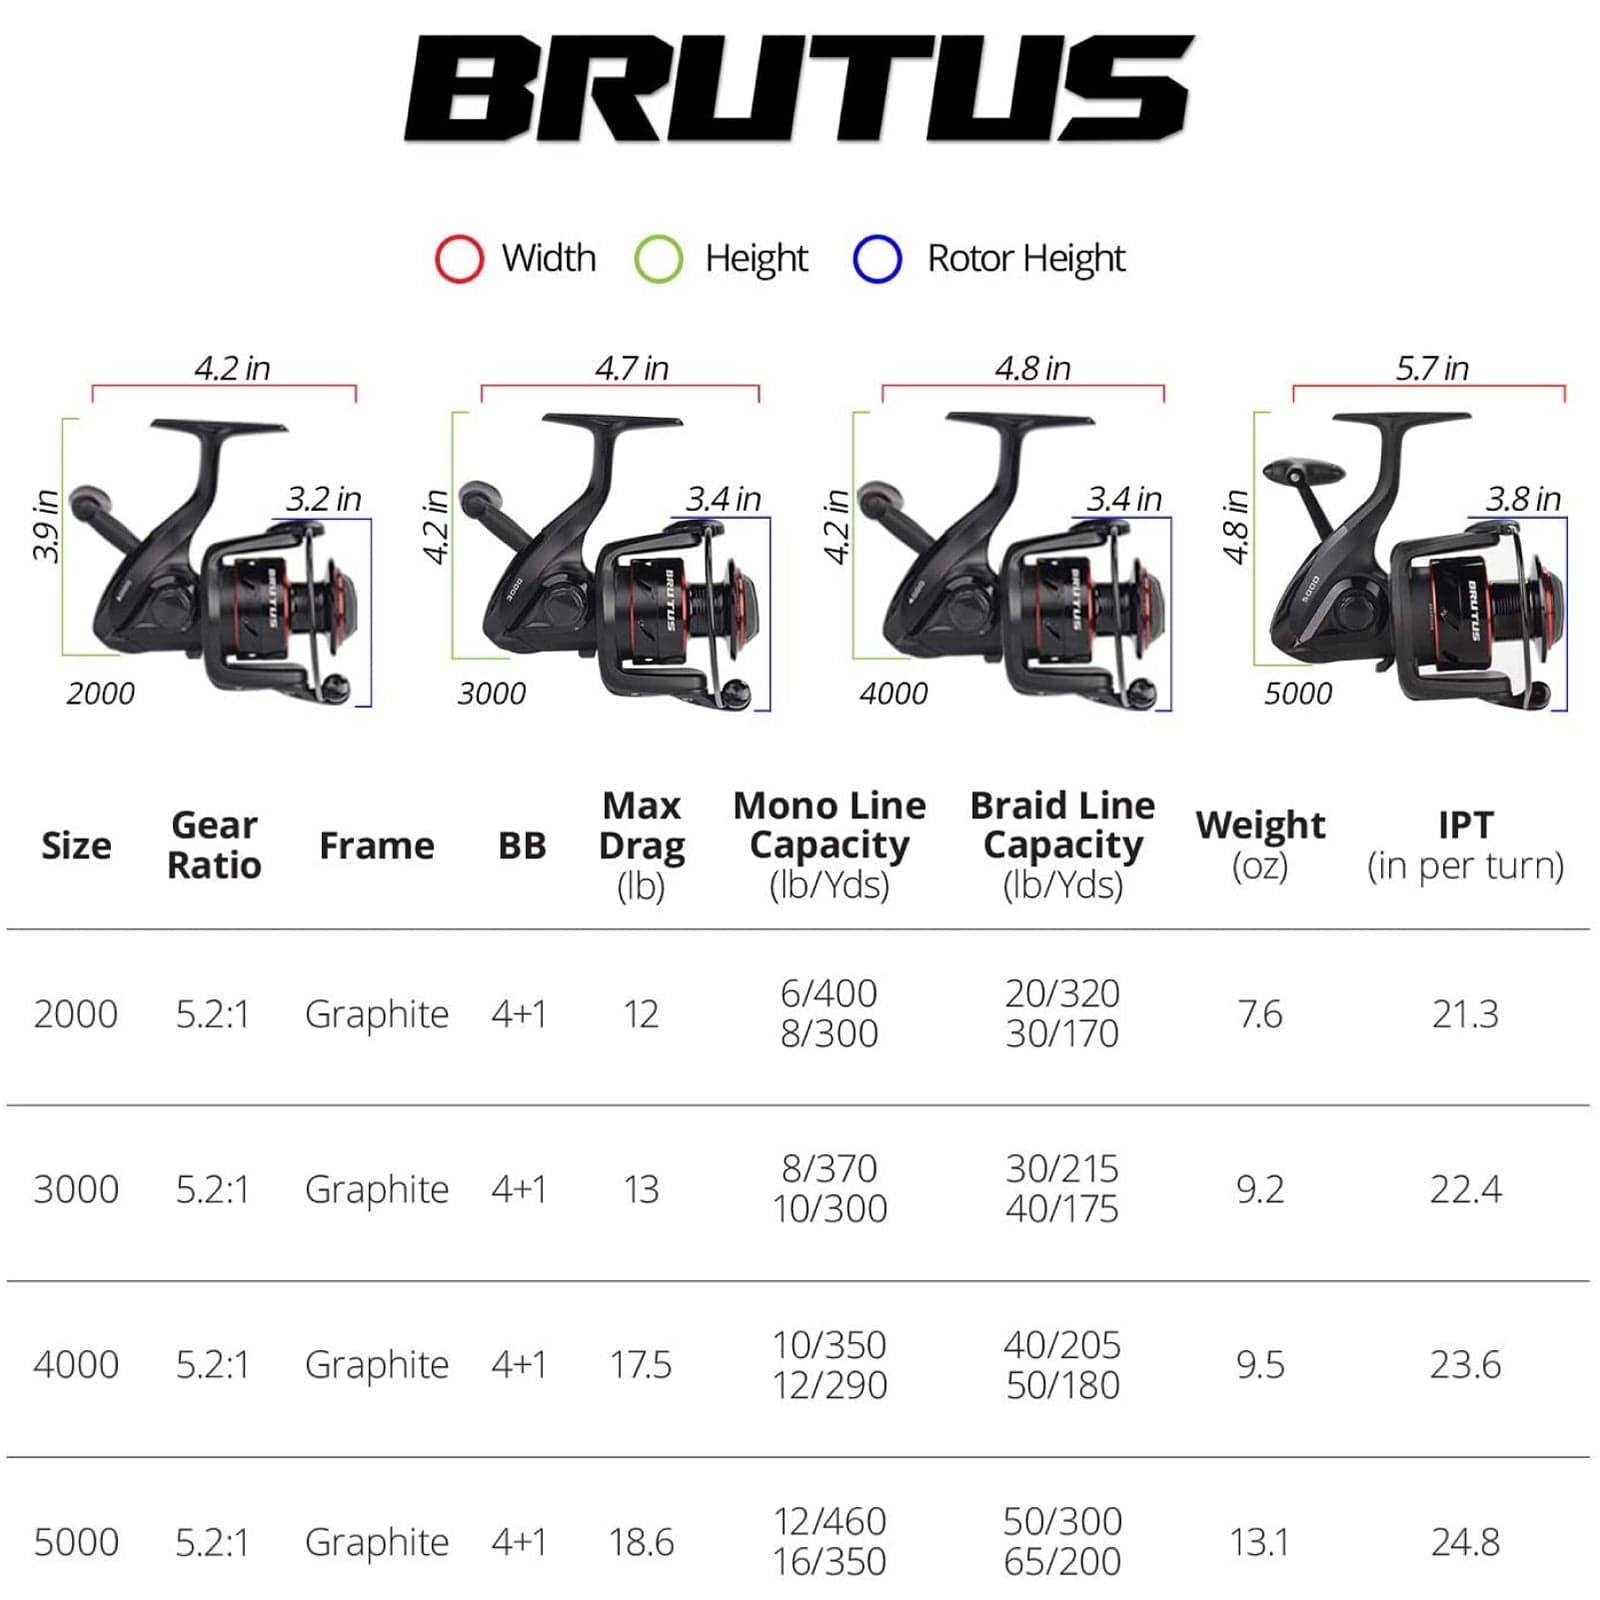 KastKing Brutus Spincast Fishing Reel, Easy to Use Push Button Casting Design, High Speed 4.0:1 Gear Ratio, 5 MaxiDur Ball Bearings